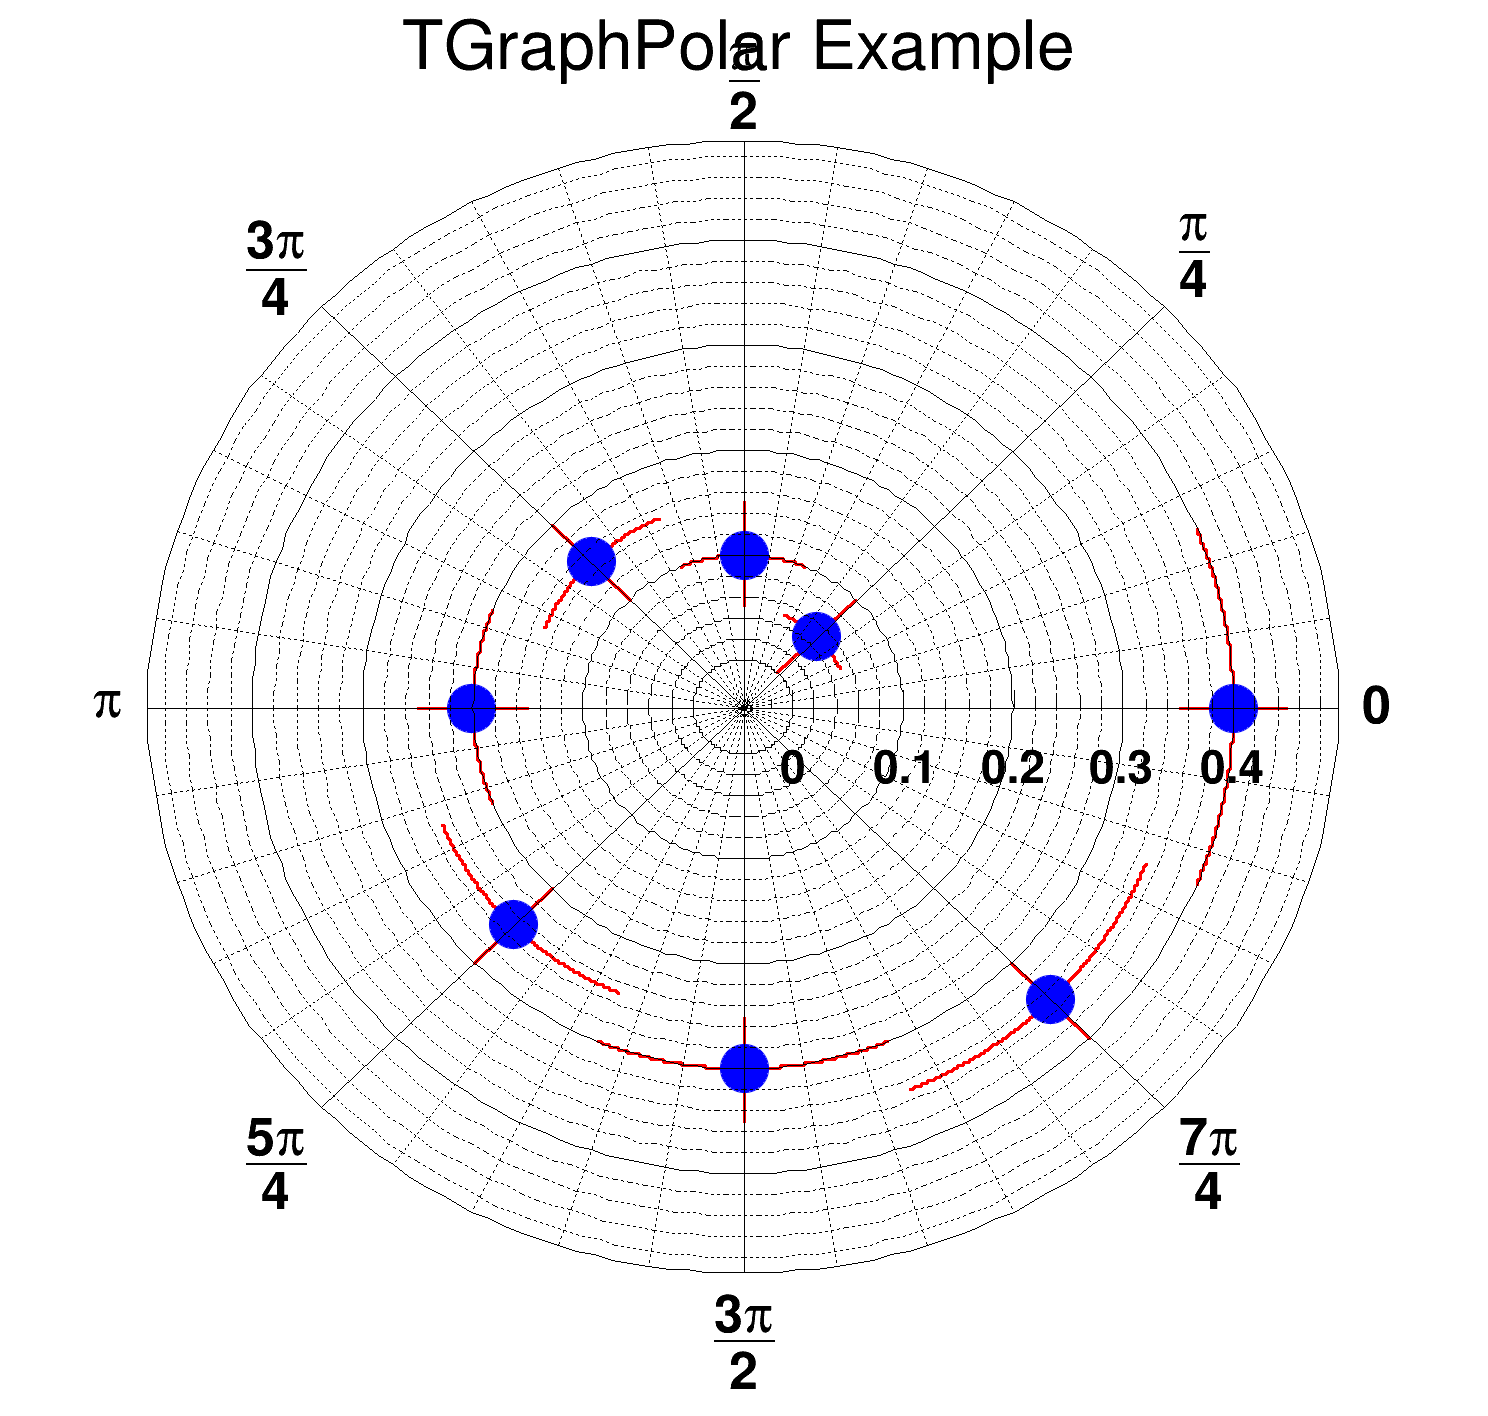 pict1_TGraphPolar_001.png